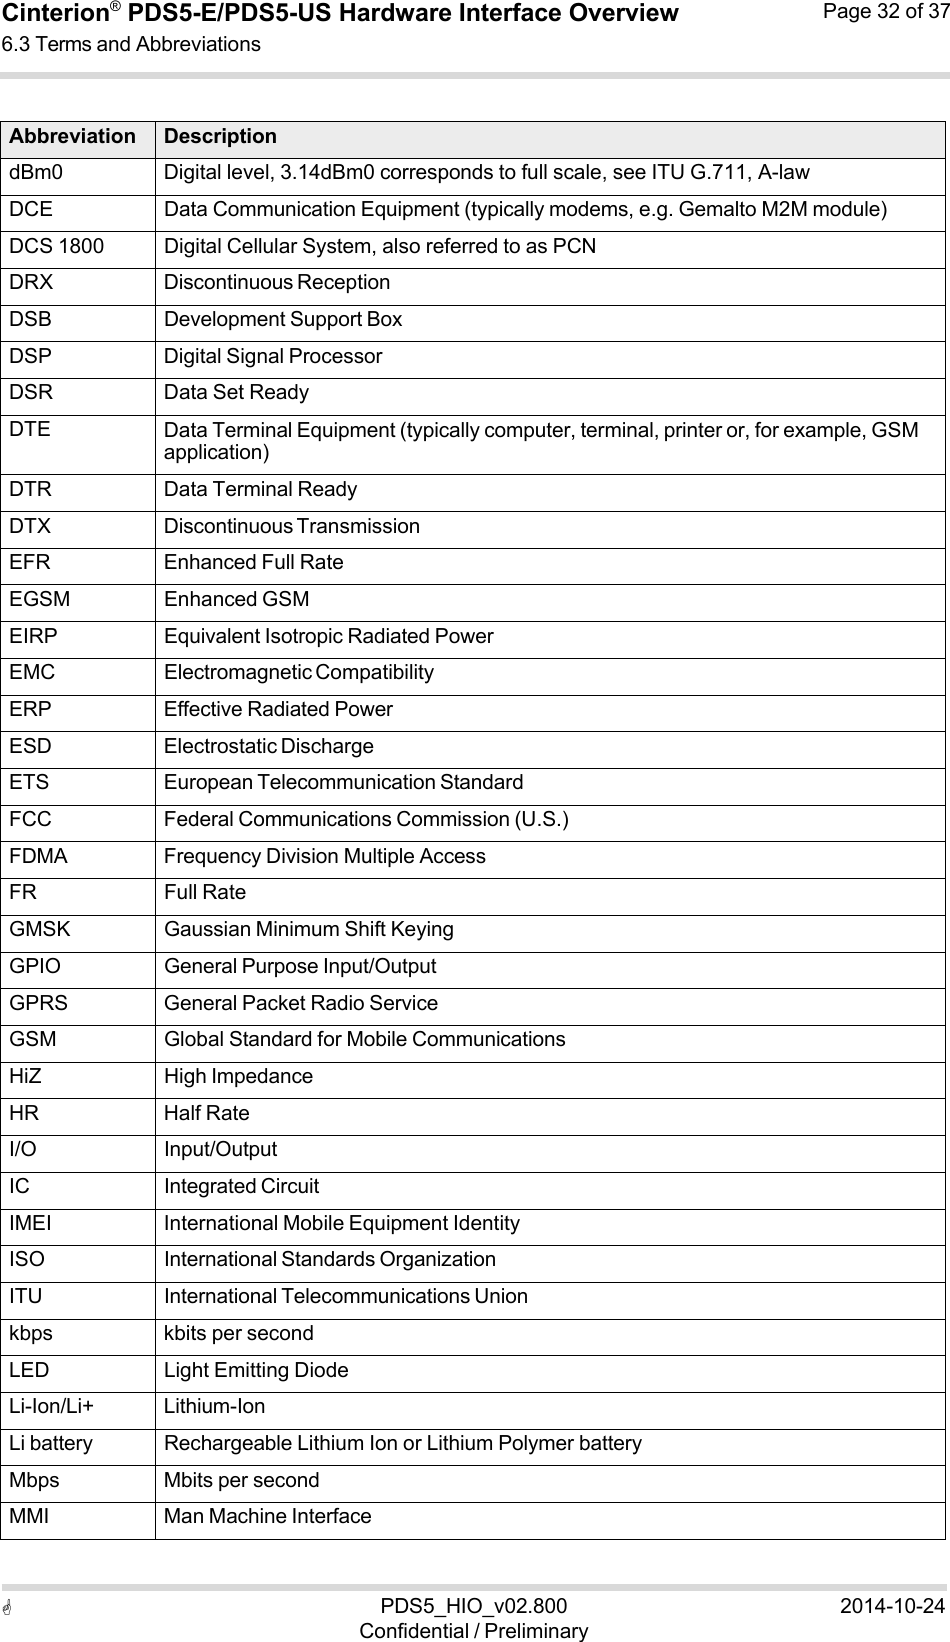  PDS5_HIO_v02.800Confidential / Preliminary2014-10-24Cinterion®  PDS5-E/PDS5-US Hardware Interface Overview6.3 Terms and Abbreviations Page 32 of 37    Abbreviation Description dBm0 Digital level, 3.14dBm0 corresponds to full scale, see ITU G.711, A-law DCE Data Communication Equipment (typically modems, e.g. Gemalto M2M module)DCS 1800 Digital Cellular System, also referred to as PCNDRX Discontinuous ReceptionDSB Development Support BoxDSP Digital Signal ProcessorDSR Data Set Ready DTE Data Terminal Equipment (typically computer, terminal, printer or, for example, GSM application) DTR Data Terminal Ready DTX Discontinuous TransmissionEFR Enhanced Full Rate EGSM Enhanced GSM EIRP Equivalent Isotropic Radiated PowerEMC Electromagnetic CompatibilityERP Effective Radiated PowerESD Electrostatic DischargeETS European Telecommunication StandardFCC Federal Communications Commission (U.S.)FDMA Frequency Division Multiple AccessFR Full Rate GMSK Gaussian Minimum Shift KeyingGPIO General Purpose Input/OutputGPRS General Packet Radio ServiceGSM Global Standard for Mobile CommunicationsHiZ High Impedance HR Half Rate I/O Input/Output IC Integrated Circuit IMEI International Mobile Equipment IdentityISO International Standards OrganizationITU International Telecommunications Unionkbps kbits per second LED Light Emitting Diode Li-Ion/Li+ Lithium-Ion Li battery Rechargeable Lithium Ion or Lithium Polymer batteryMbps Mbits per second MMI Man Machine Interface